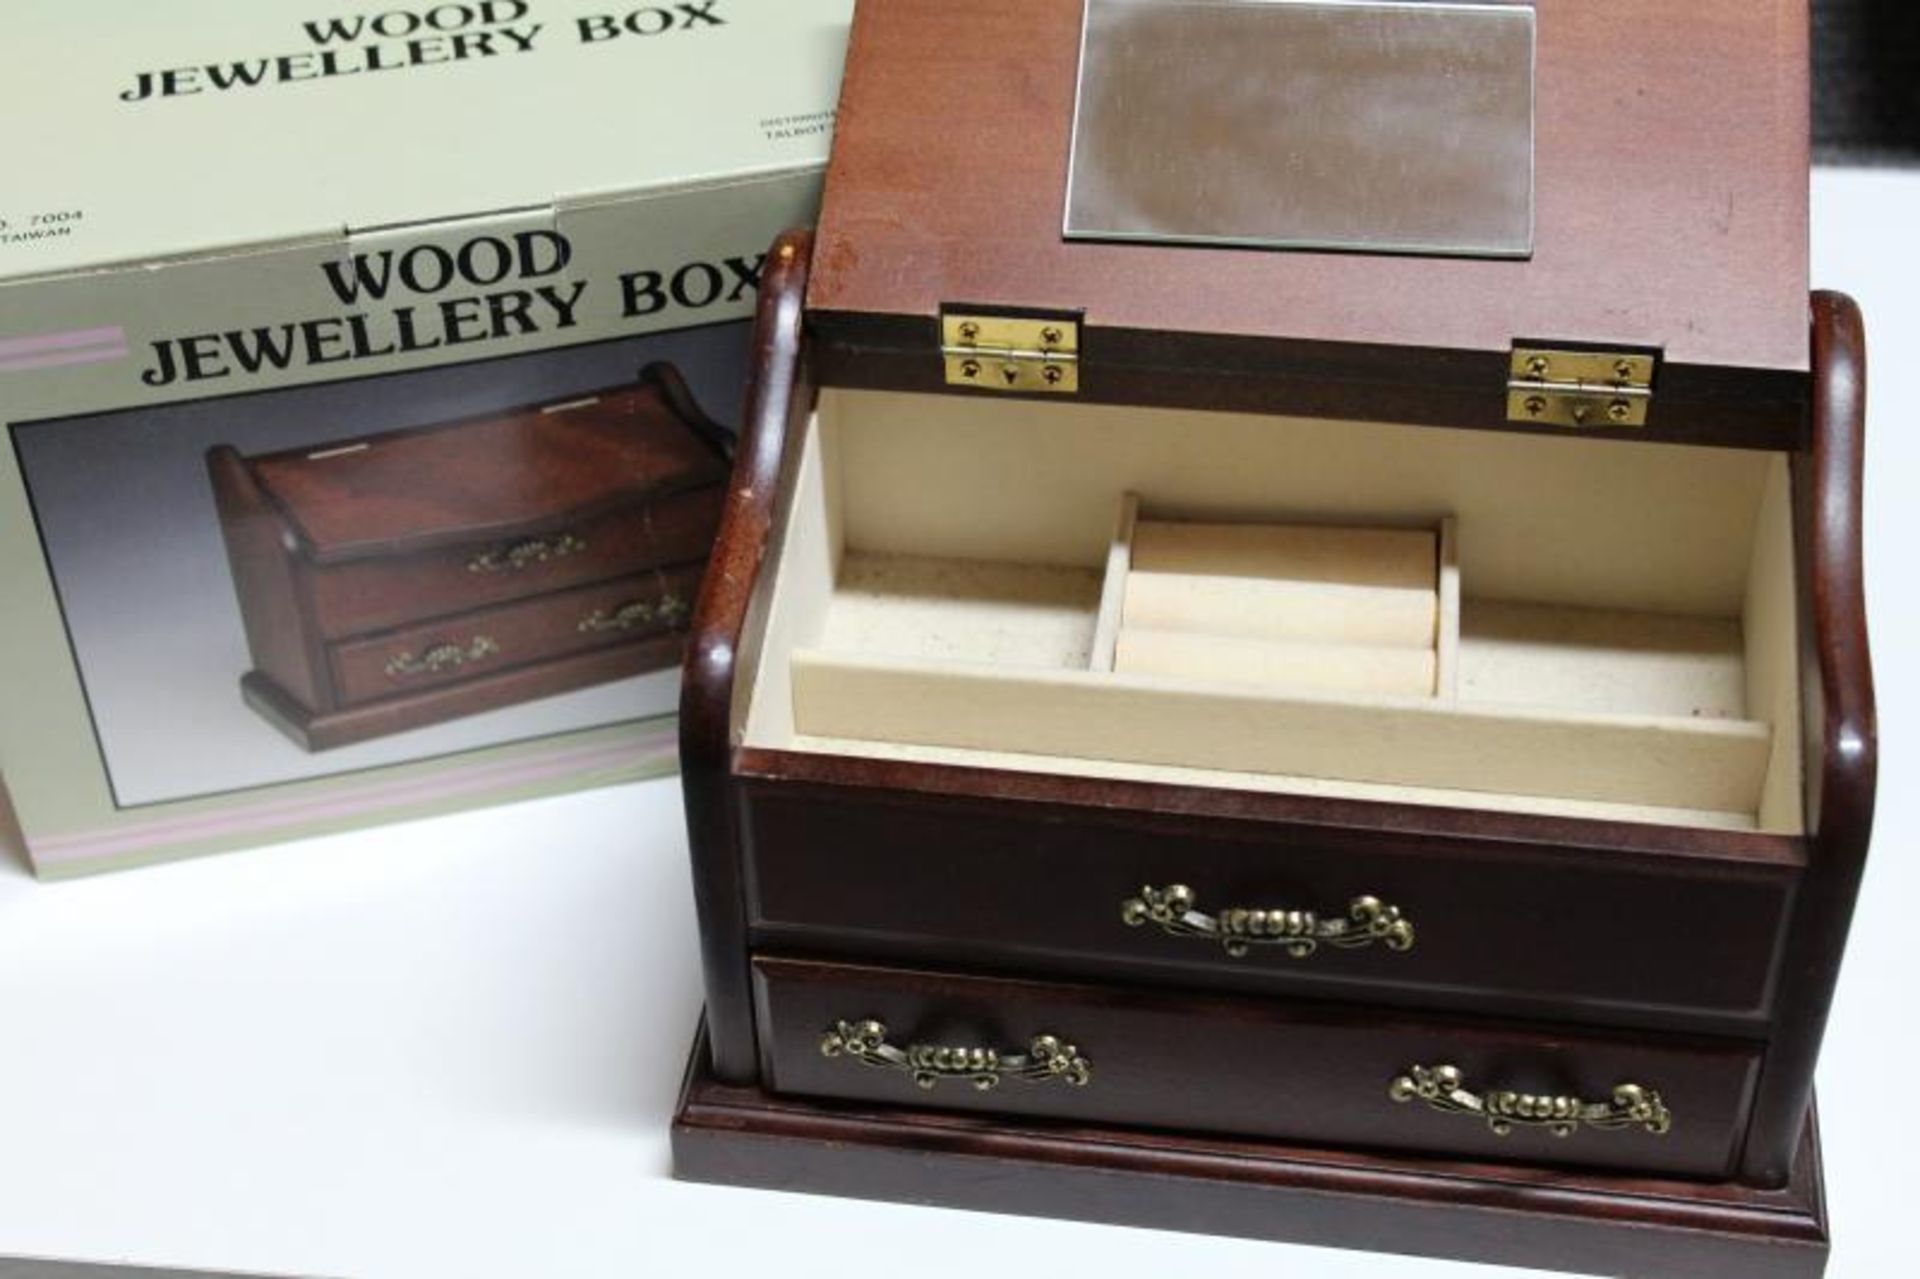 Wooden jewellery box, new in box - Image 2 of 2